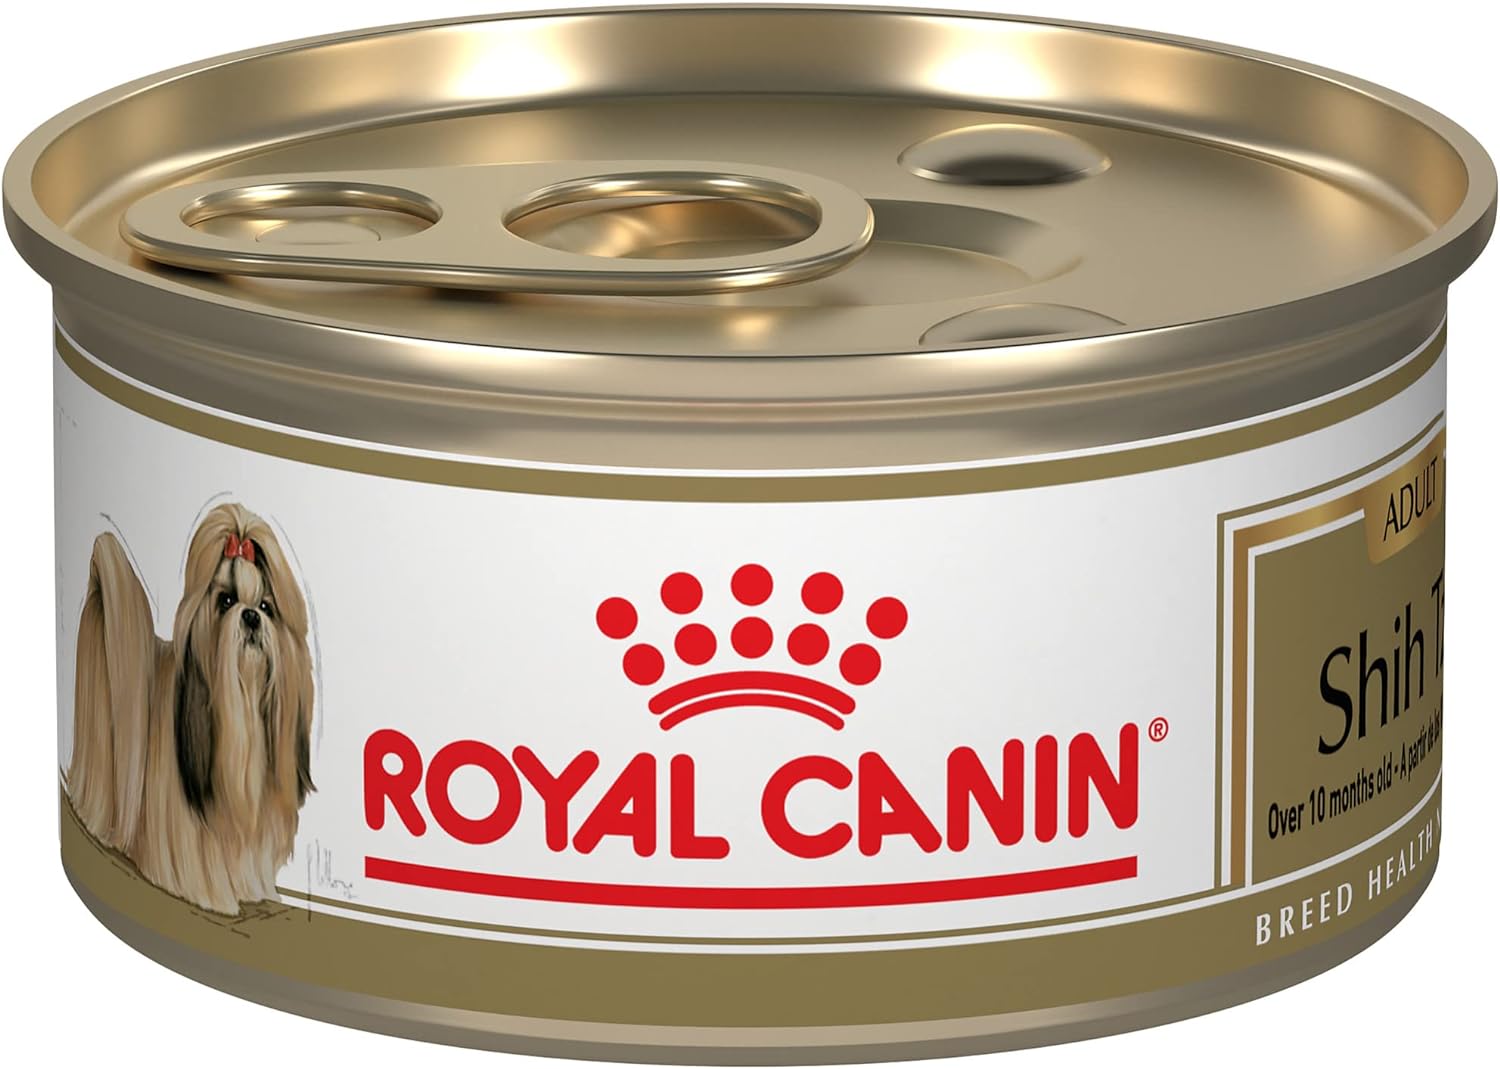 Royal Canin Shih Tzu Adult Breed Specific Wet Dog Food, 3 oz can (24-count)